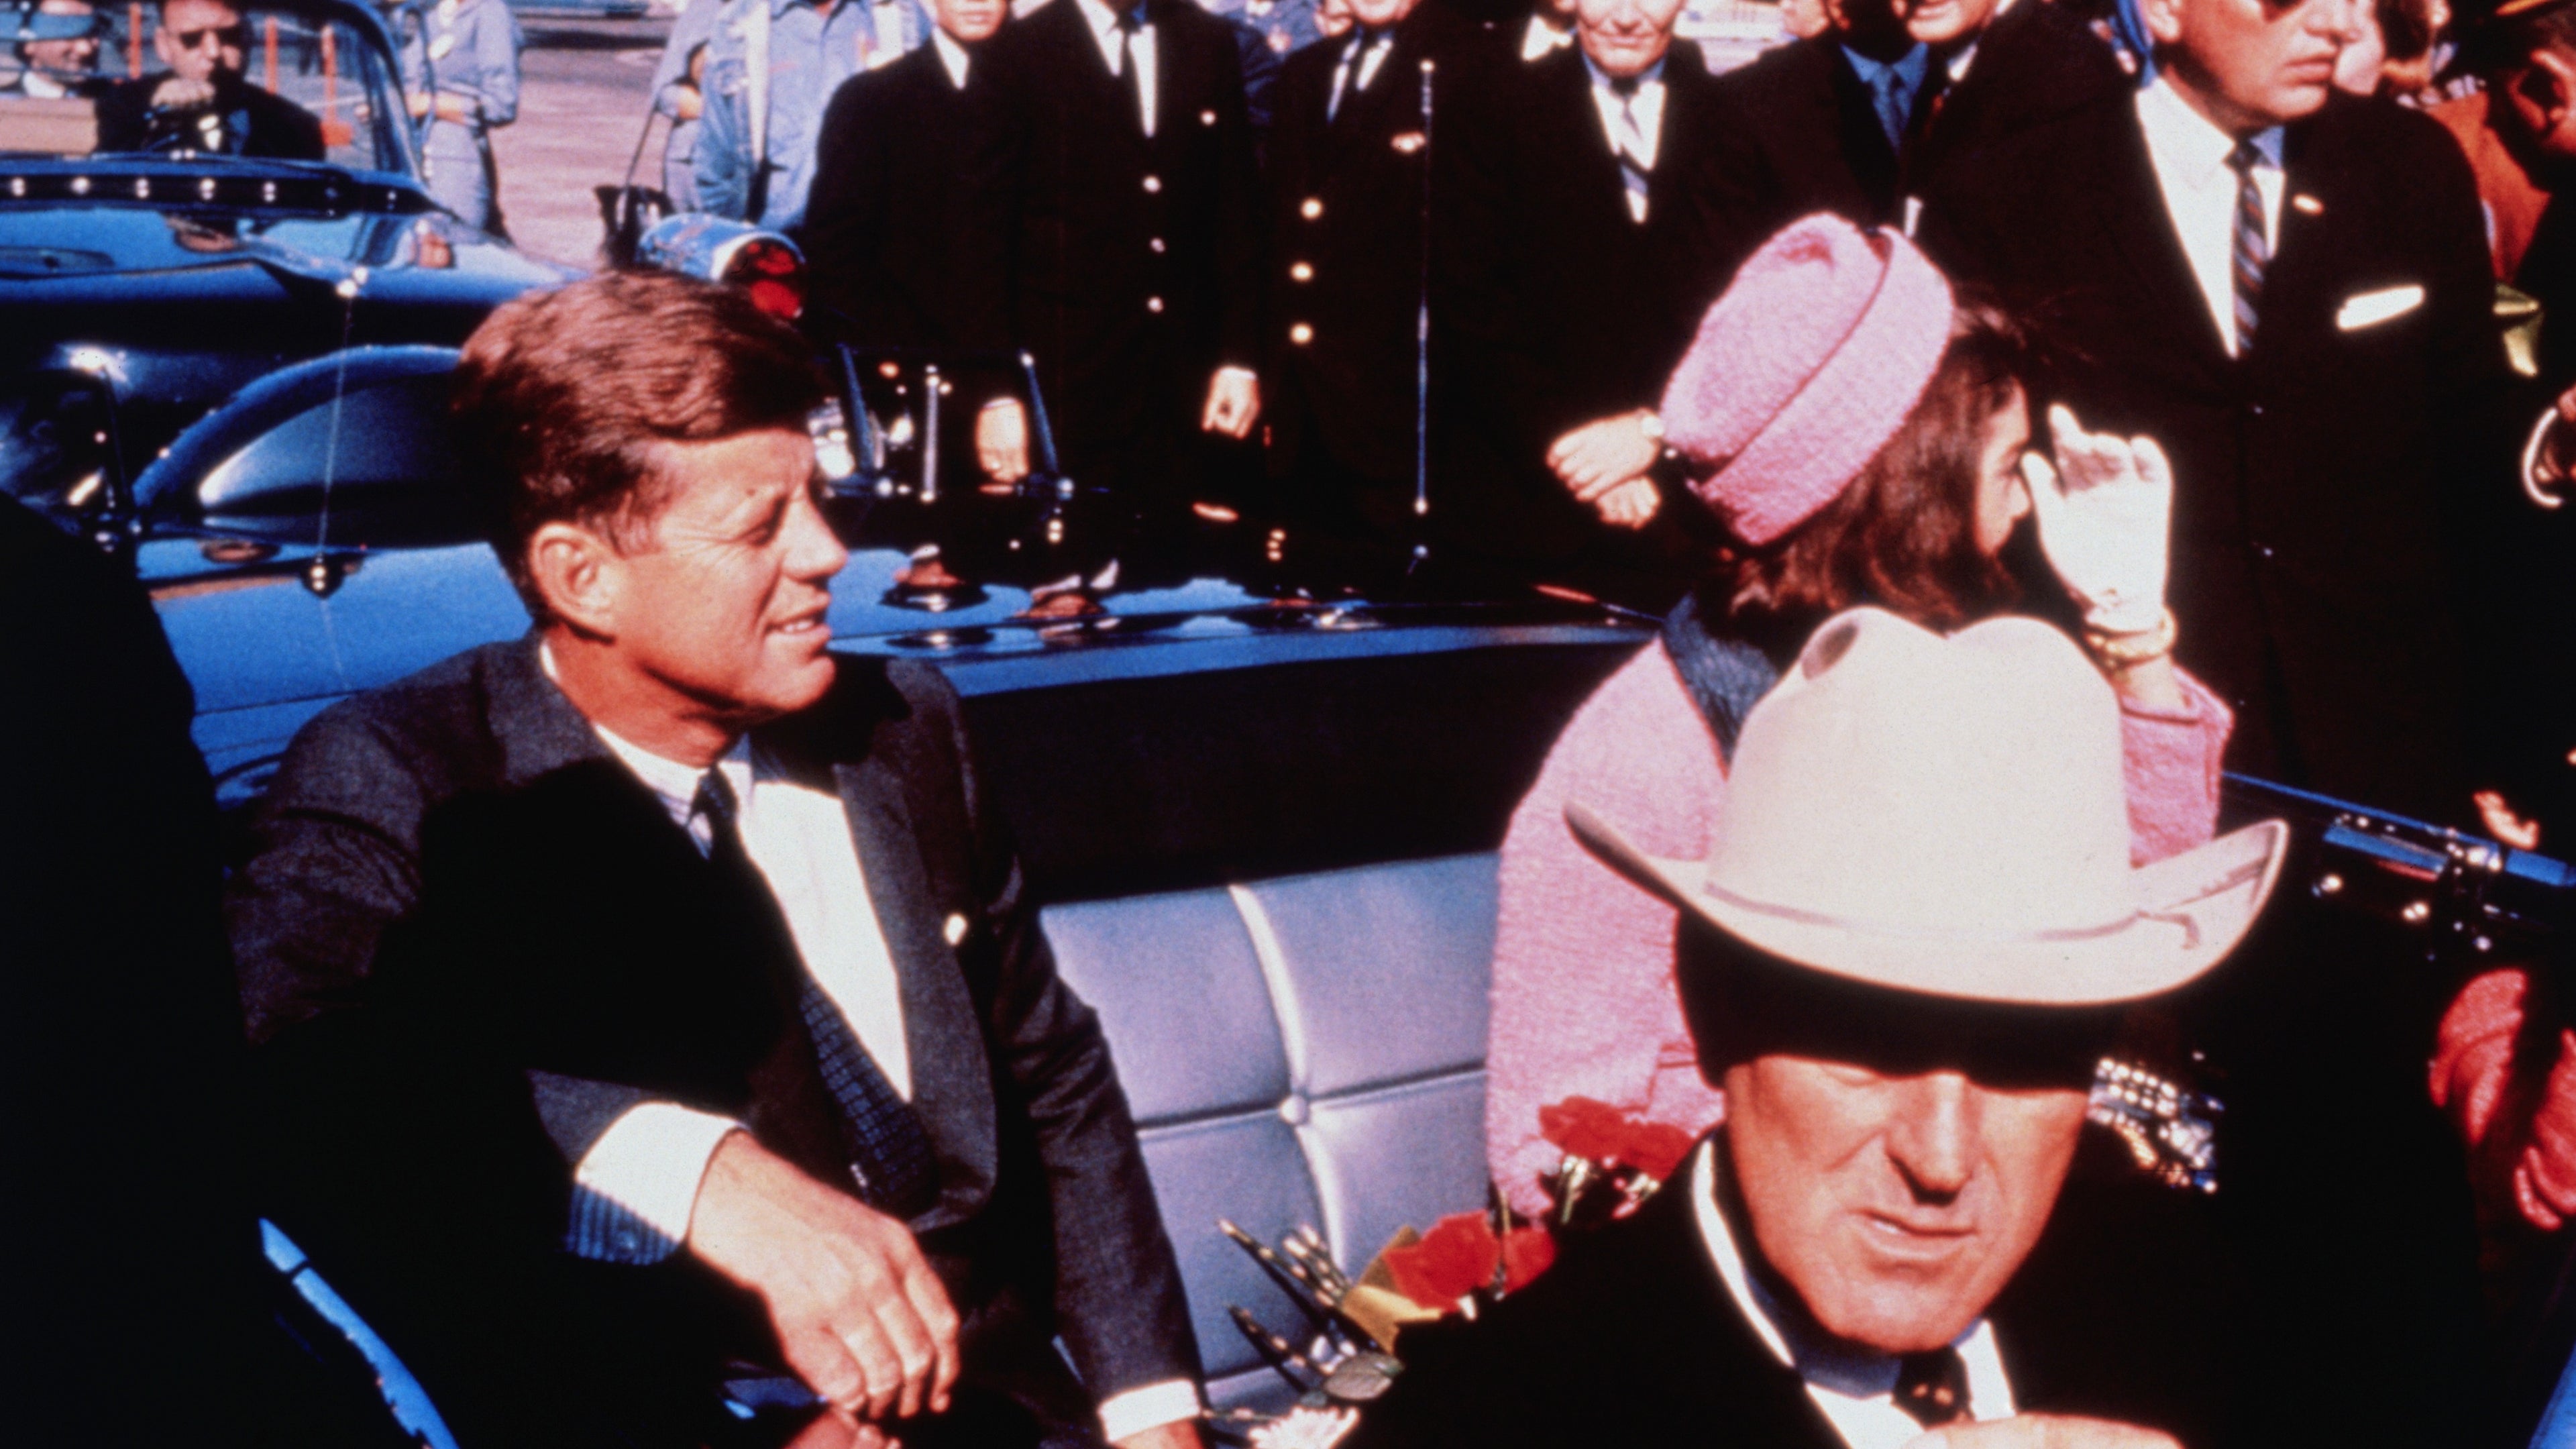 Texas Governor John Connally adjusts his tie (foreground) as President and Mrs. Kennedy, in a pink outfit, settled in rear seats, prepared for motorcade into city from airport, Nov. 22. After a few speaking stops, the President was assassinated in the same car.